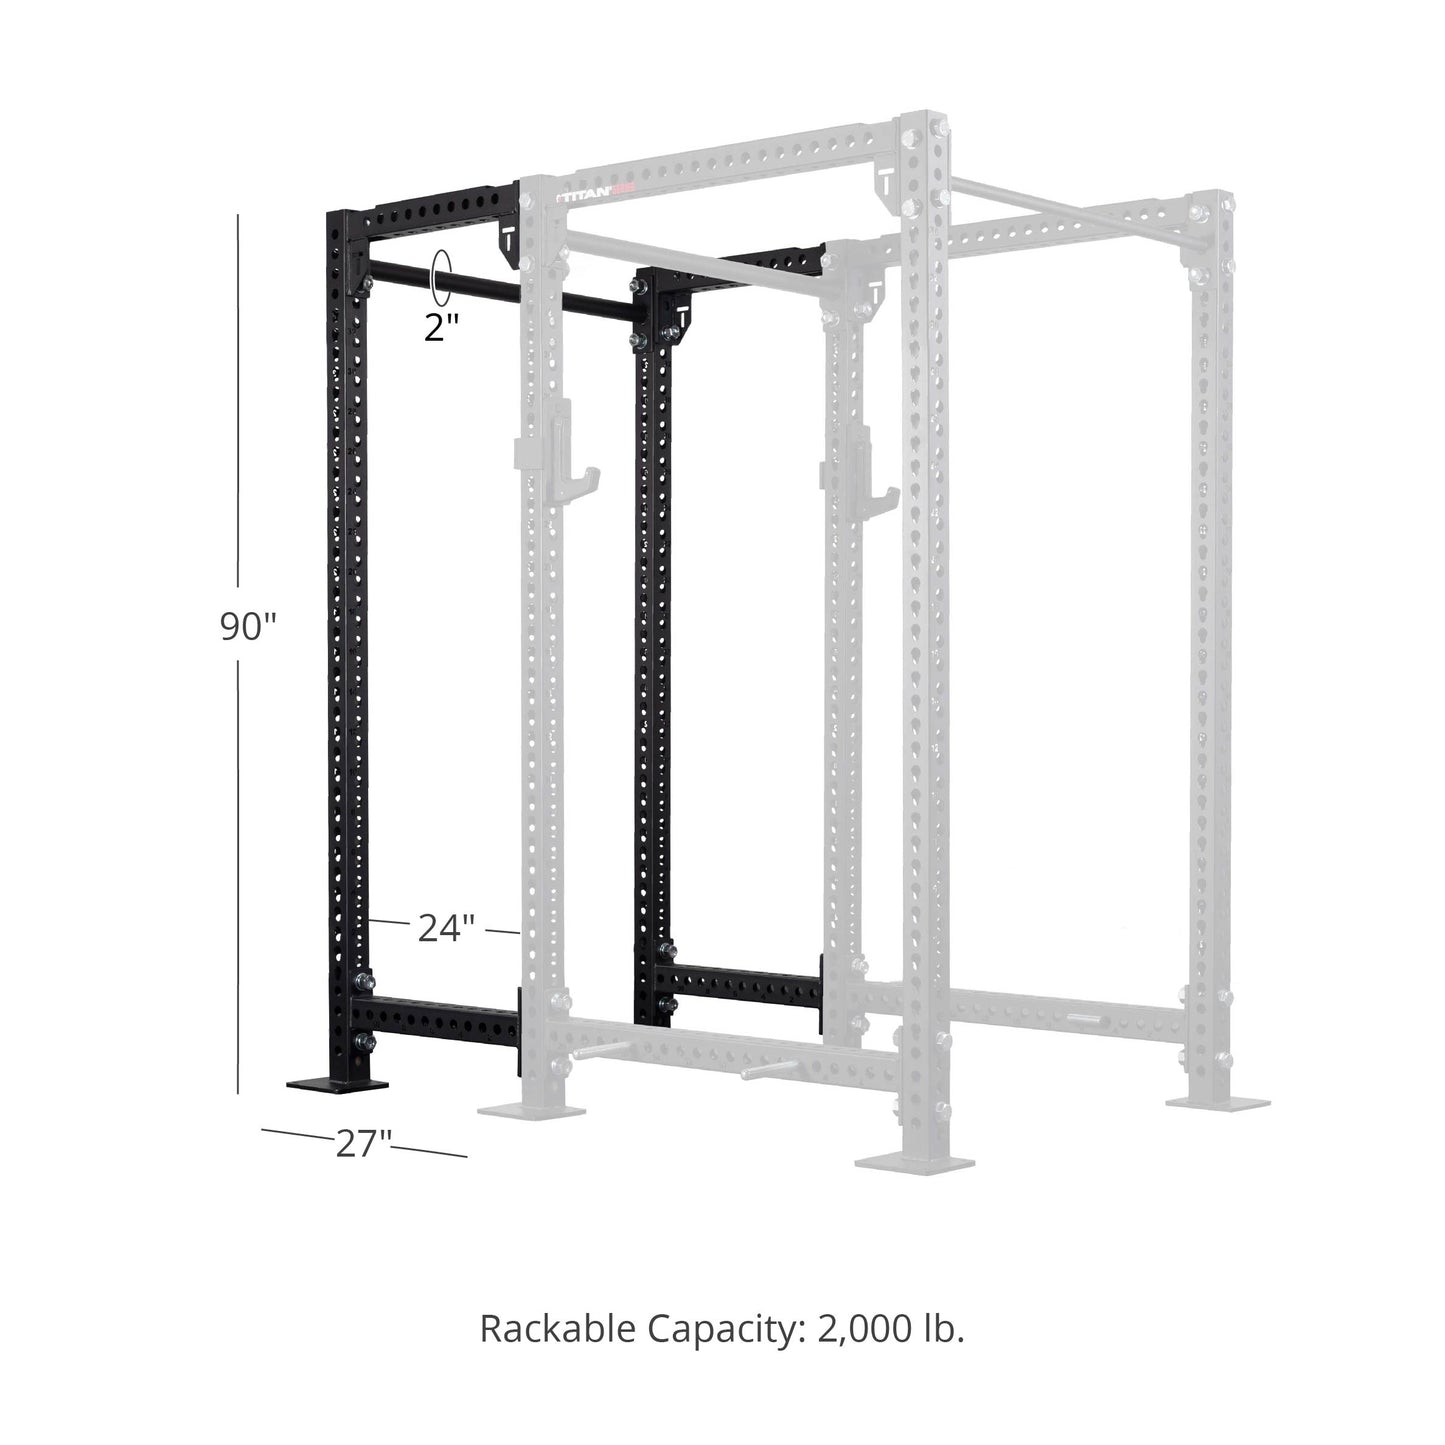 TITAN Series 24" Extension Kit - Extension Color: Black - Extension Height: 90" - Crossmember: 2" Fat Pull-Up Bar | Black / 90" / 2" Fat Pull-Up Bar - view 18